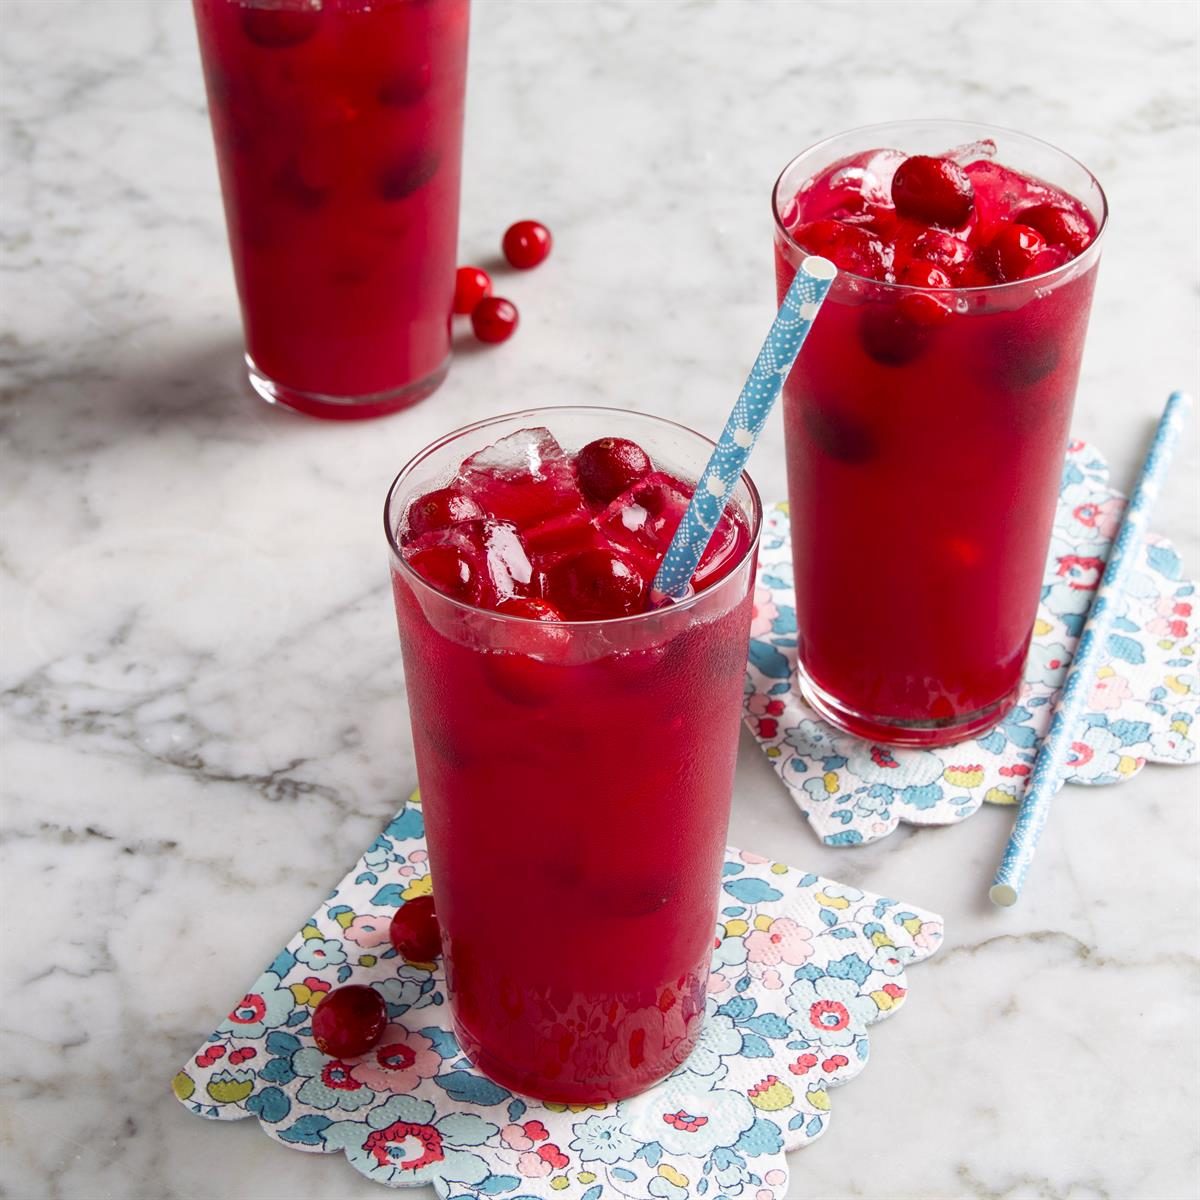 Homemade Cranberry Juice Recipe: How to Make It